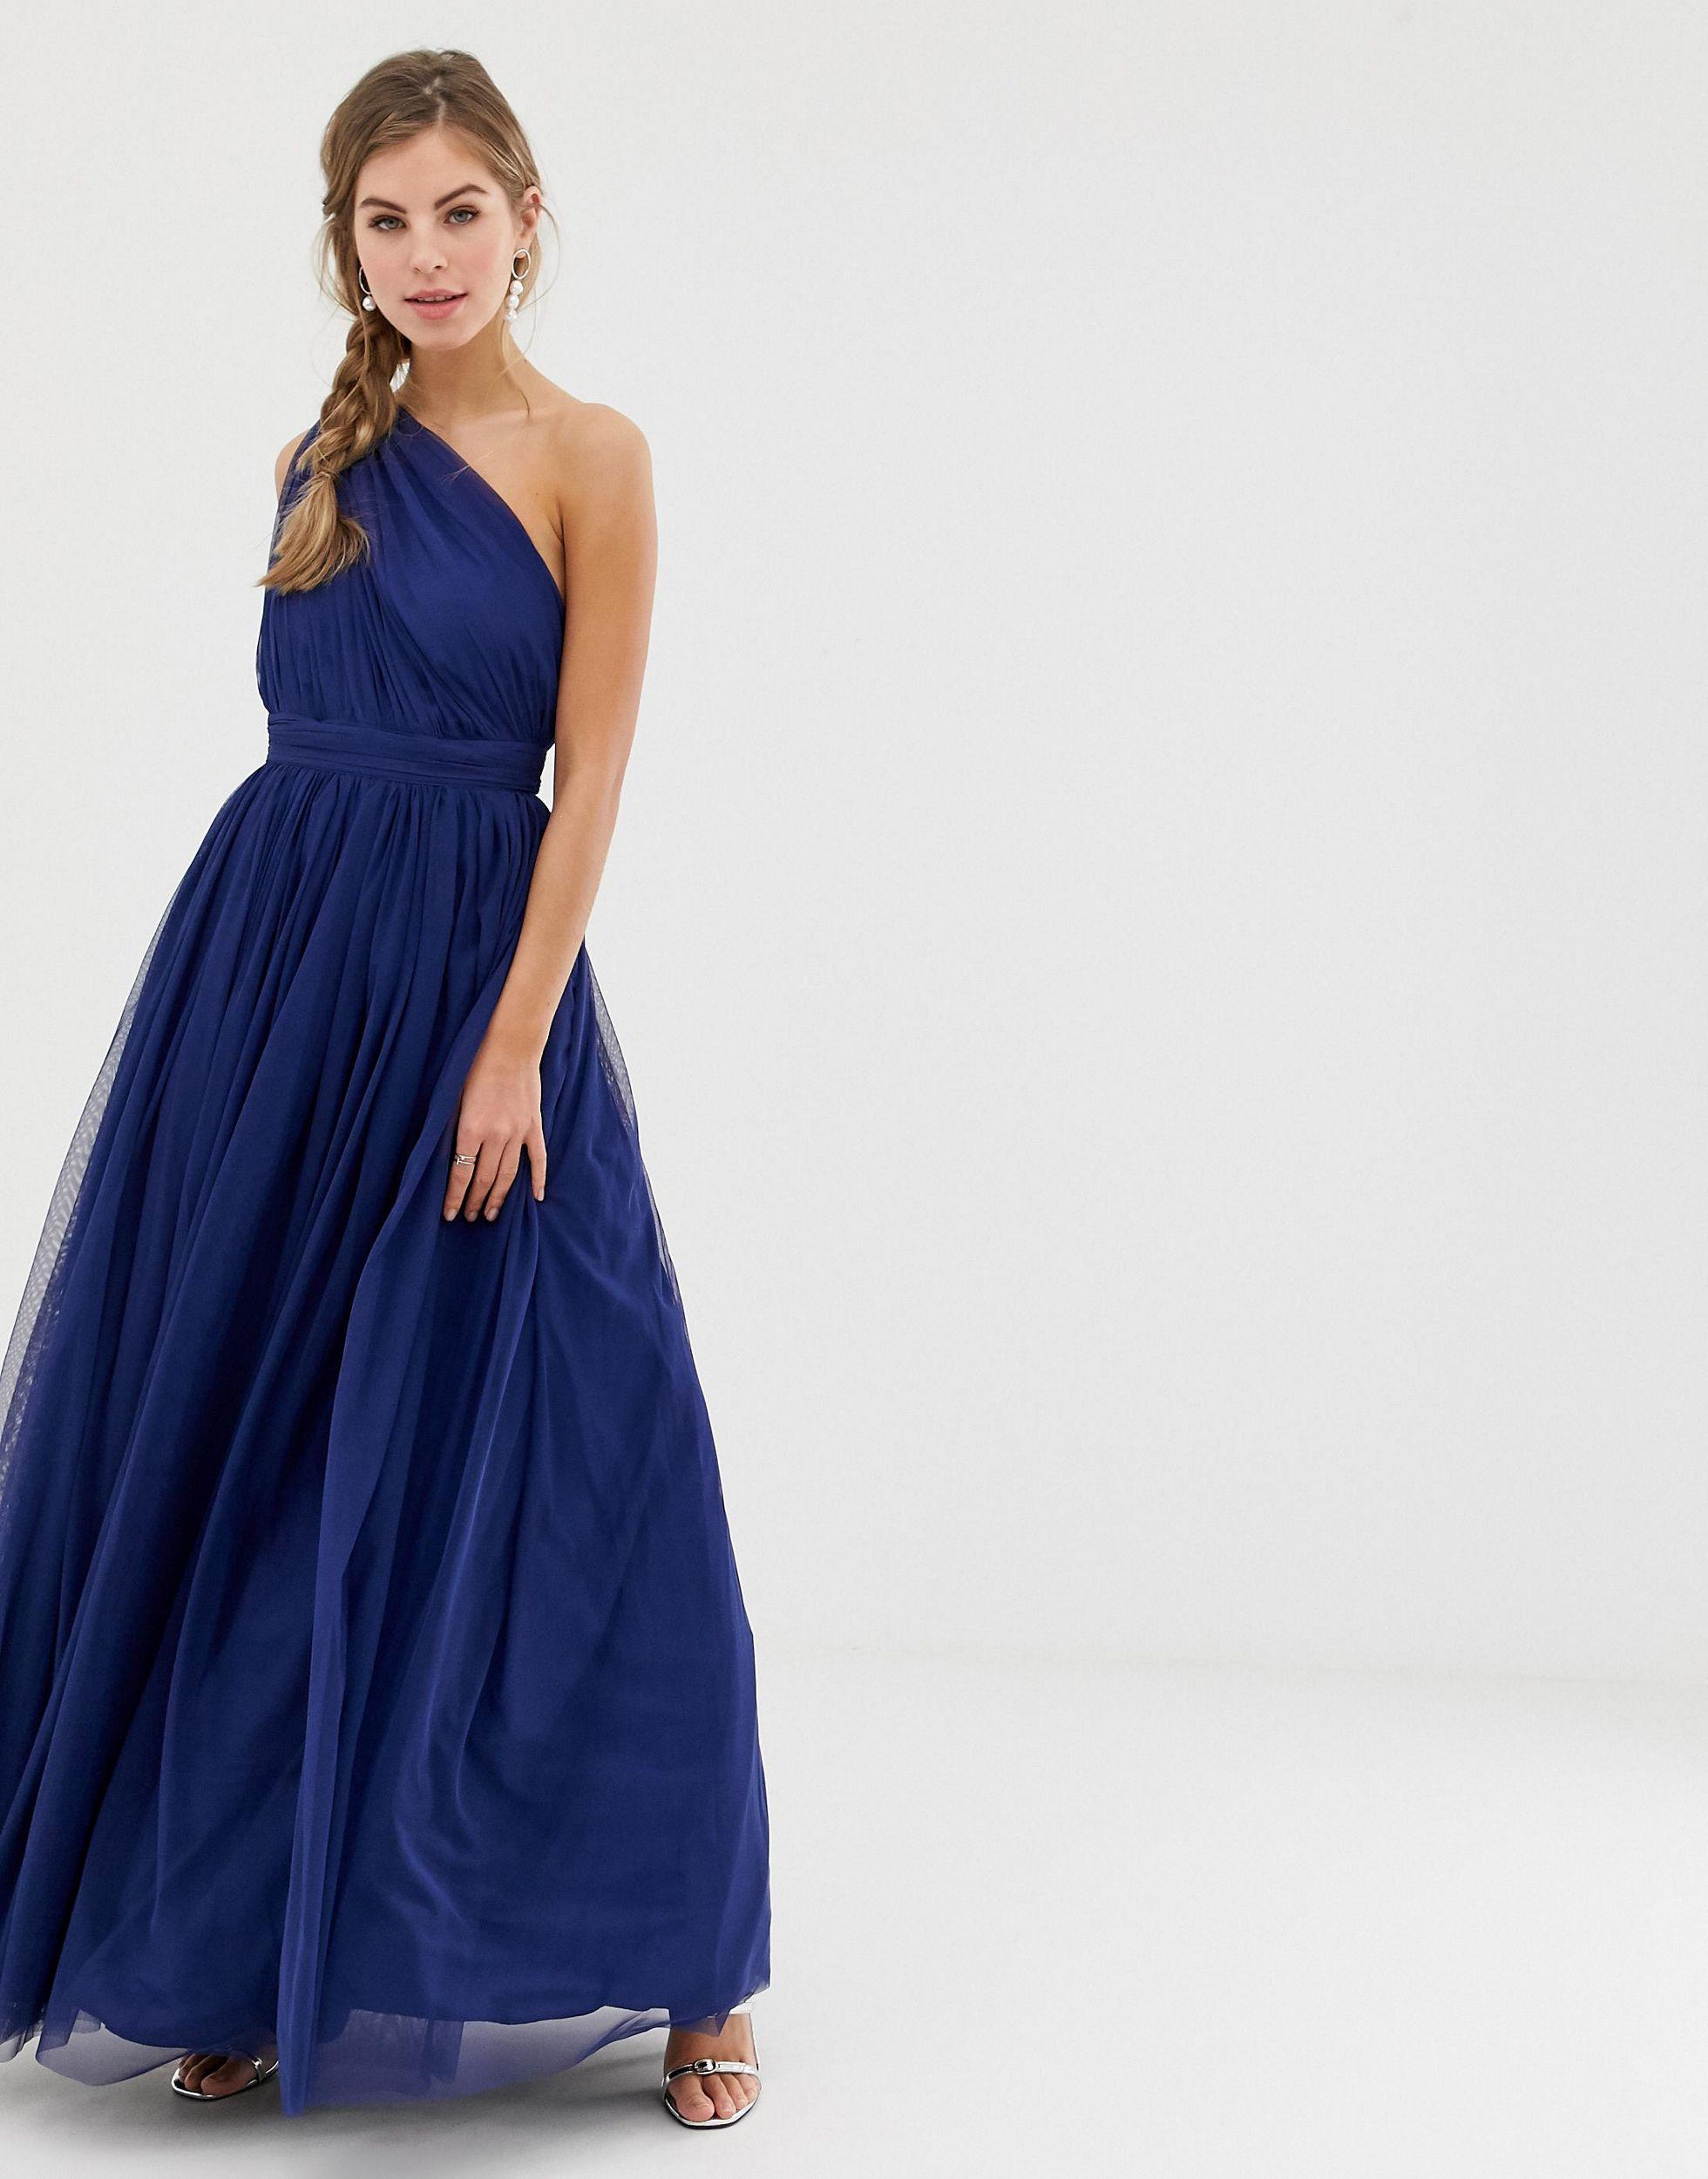 ASOS Tulle One Shoulder Maxi Dress in Blue | Lyst